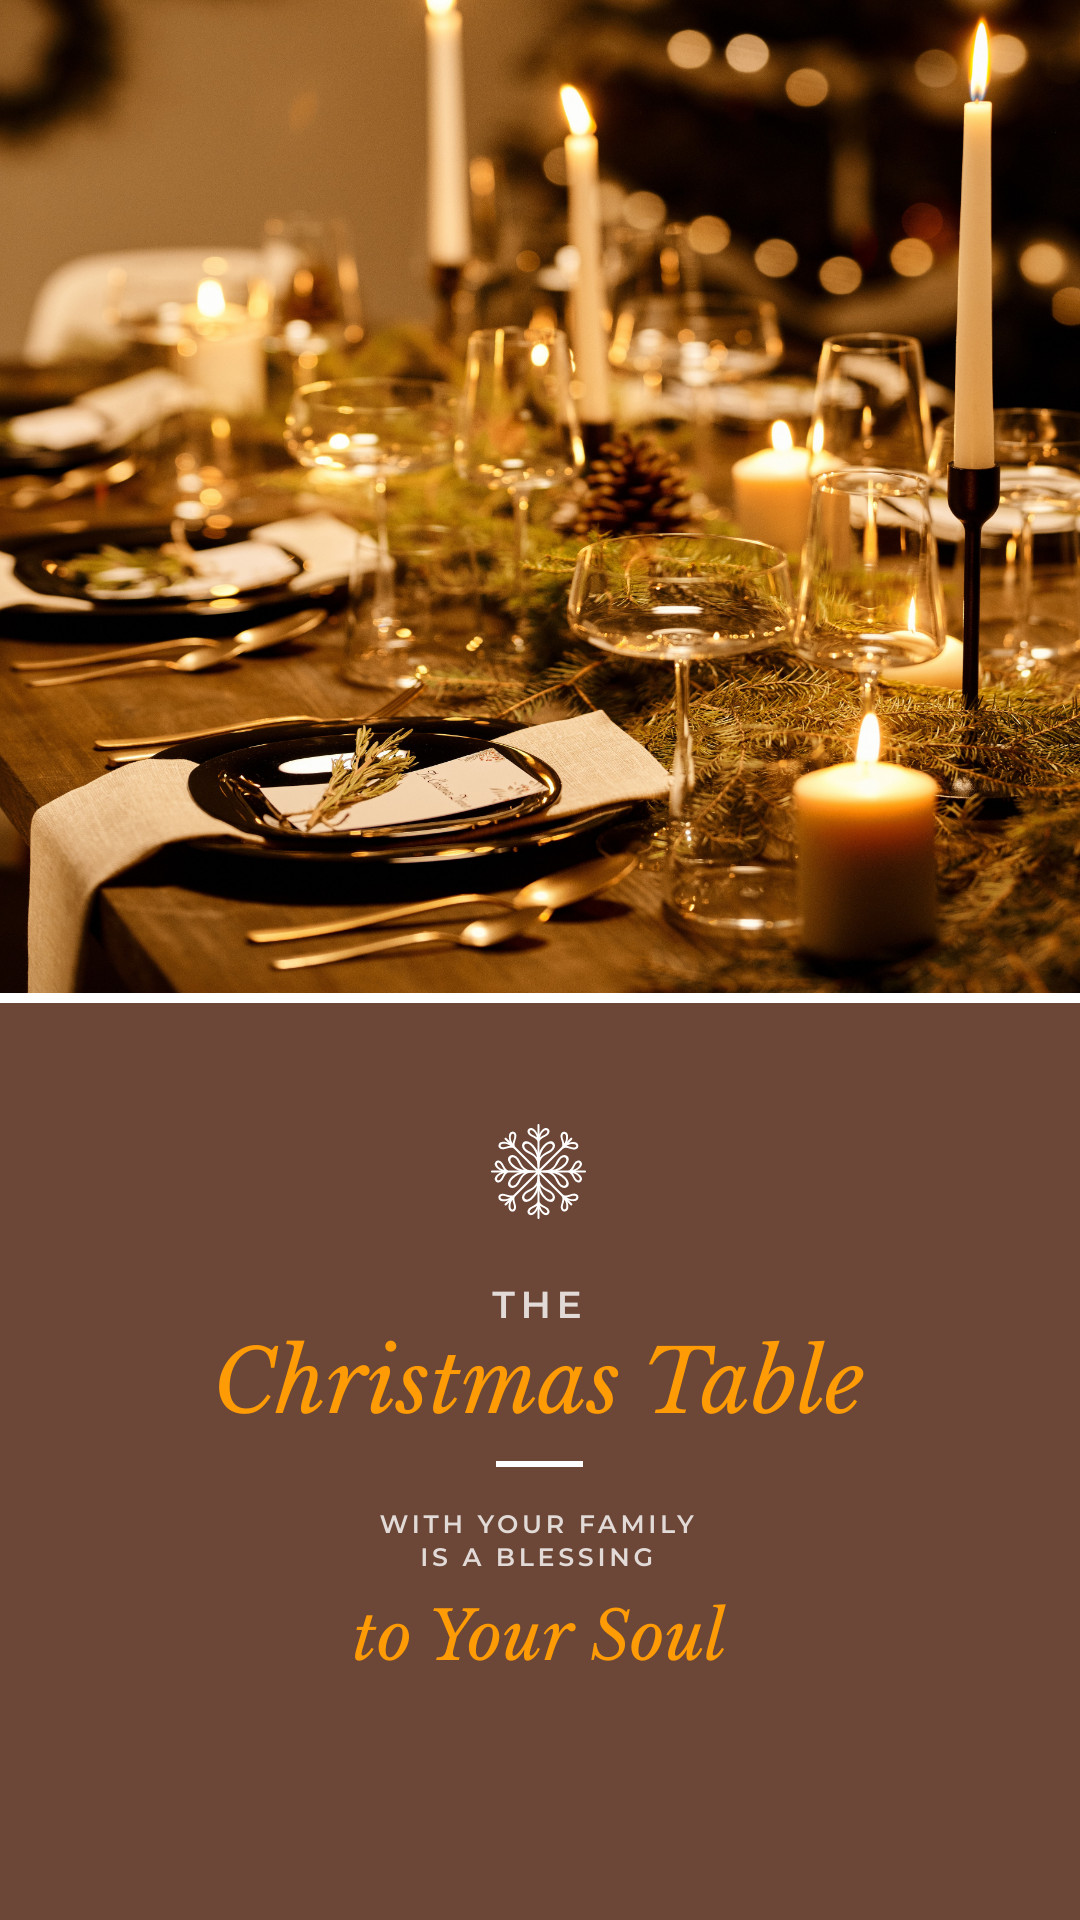 Christmas Table with Your Family Facebook Cover 820x360